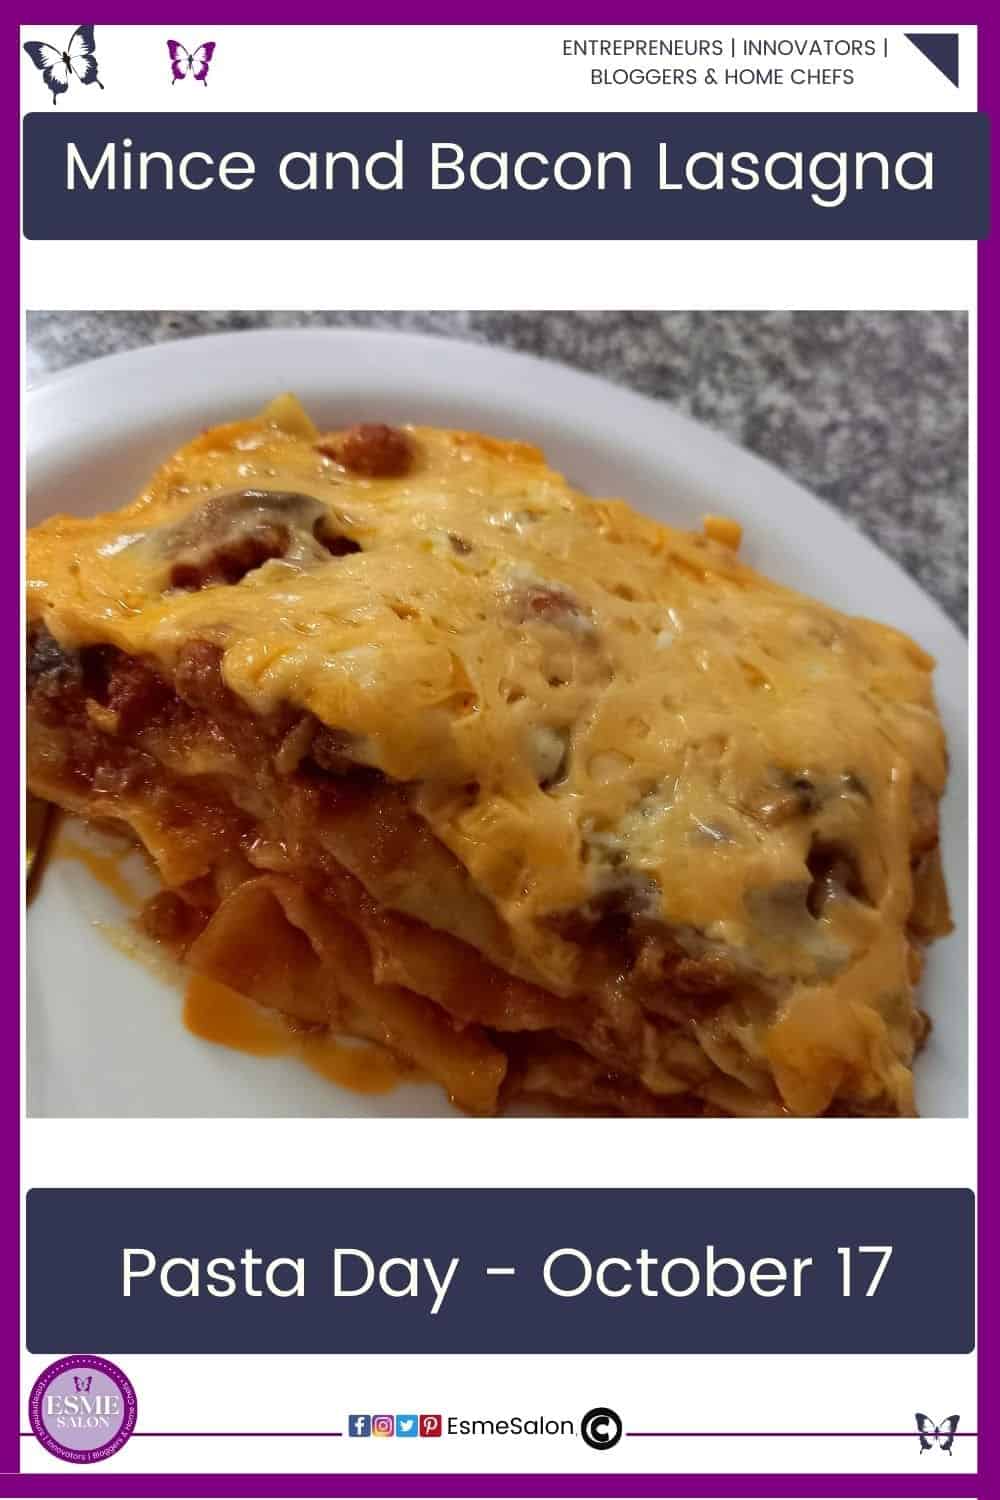 an image of a wedge of Mince and Bacon Lasagna on a white plate with lots of cheese as topping